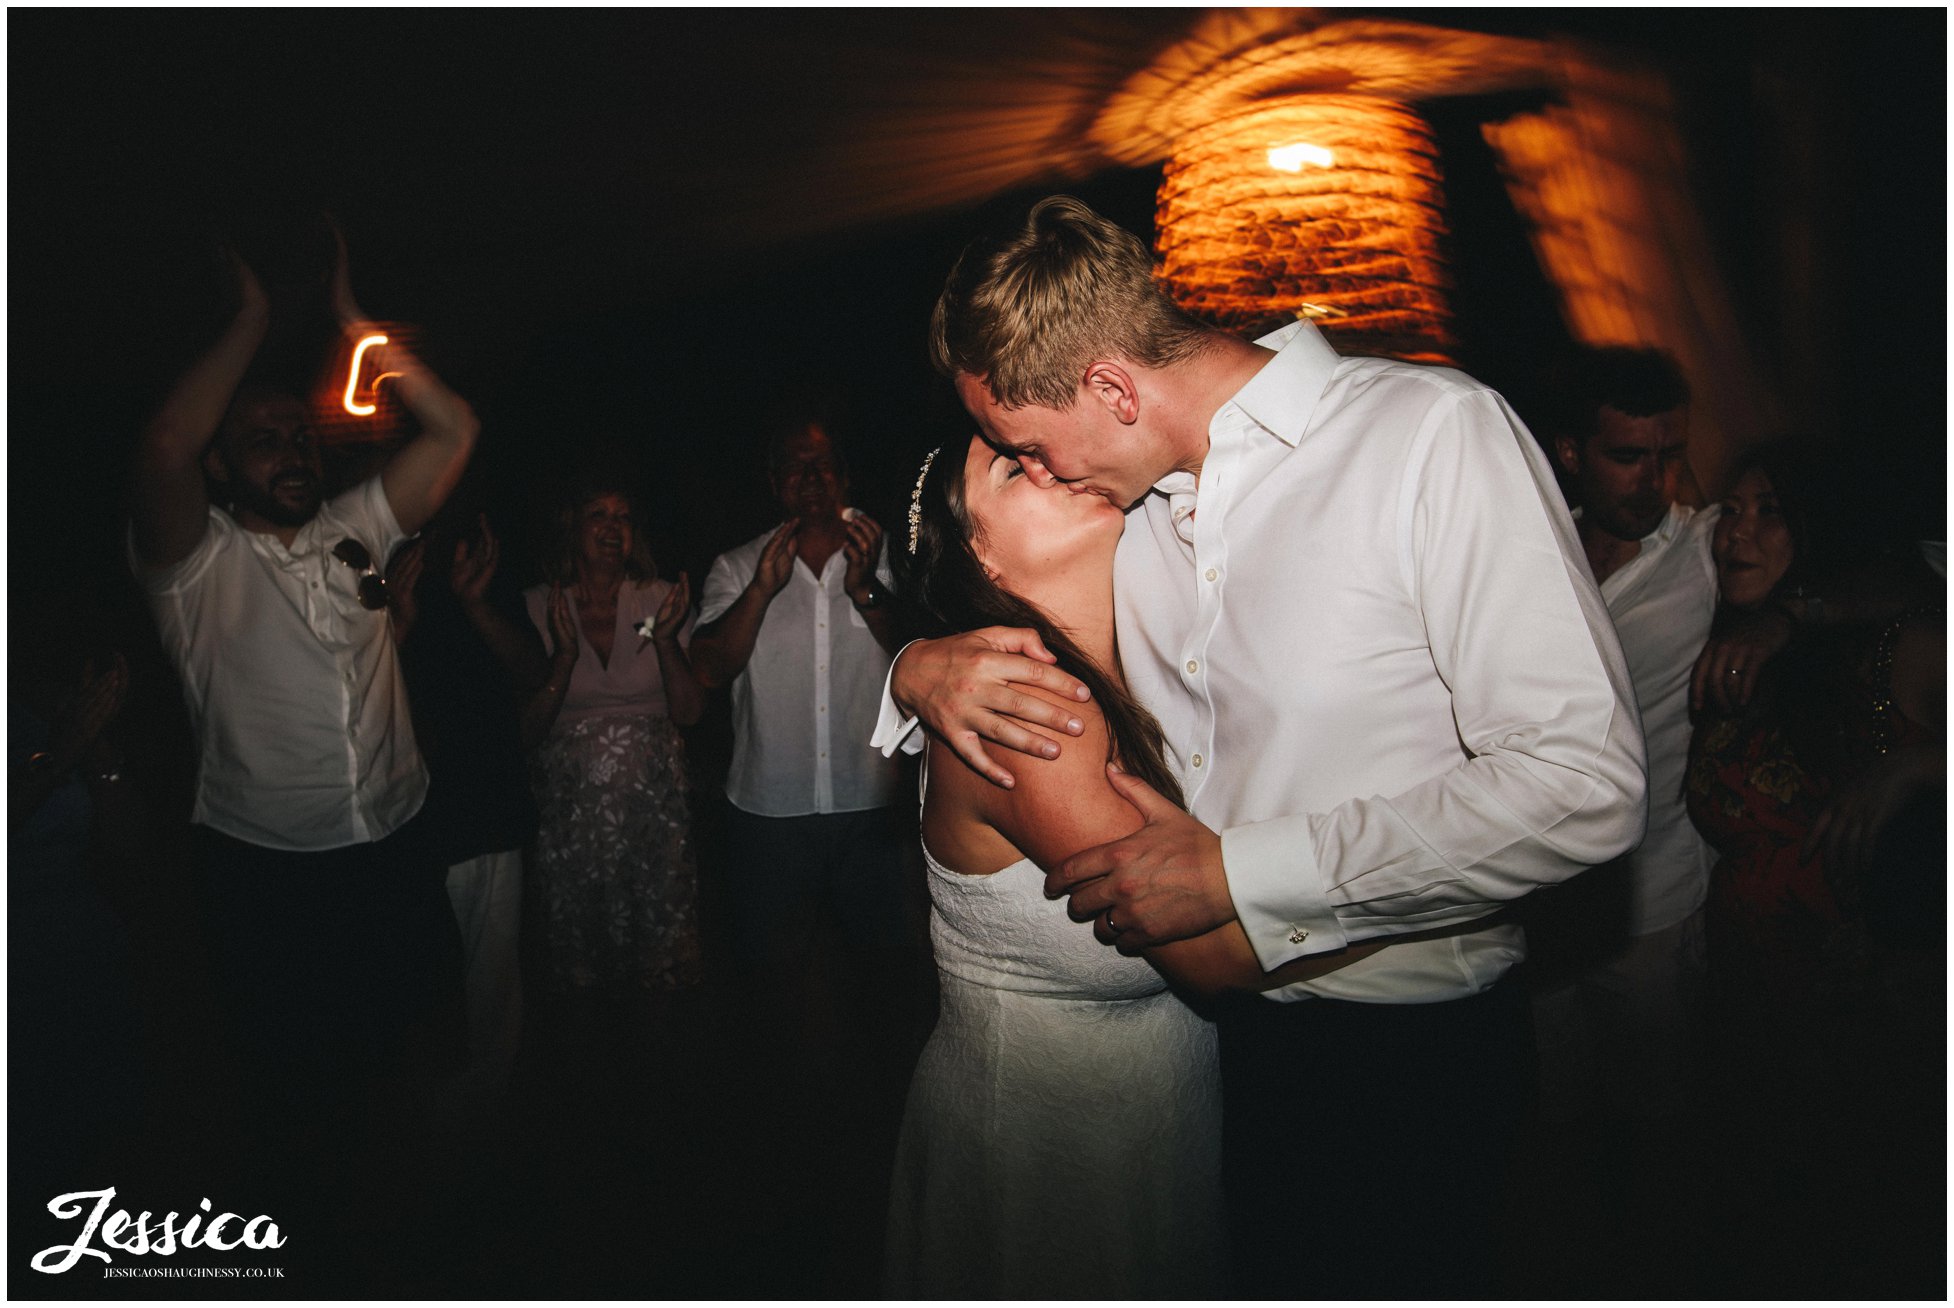 newly wed's kiss on the dancefloor at their st paul's bay wedding in greece